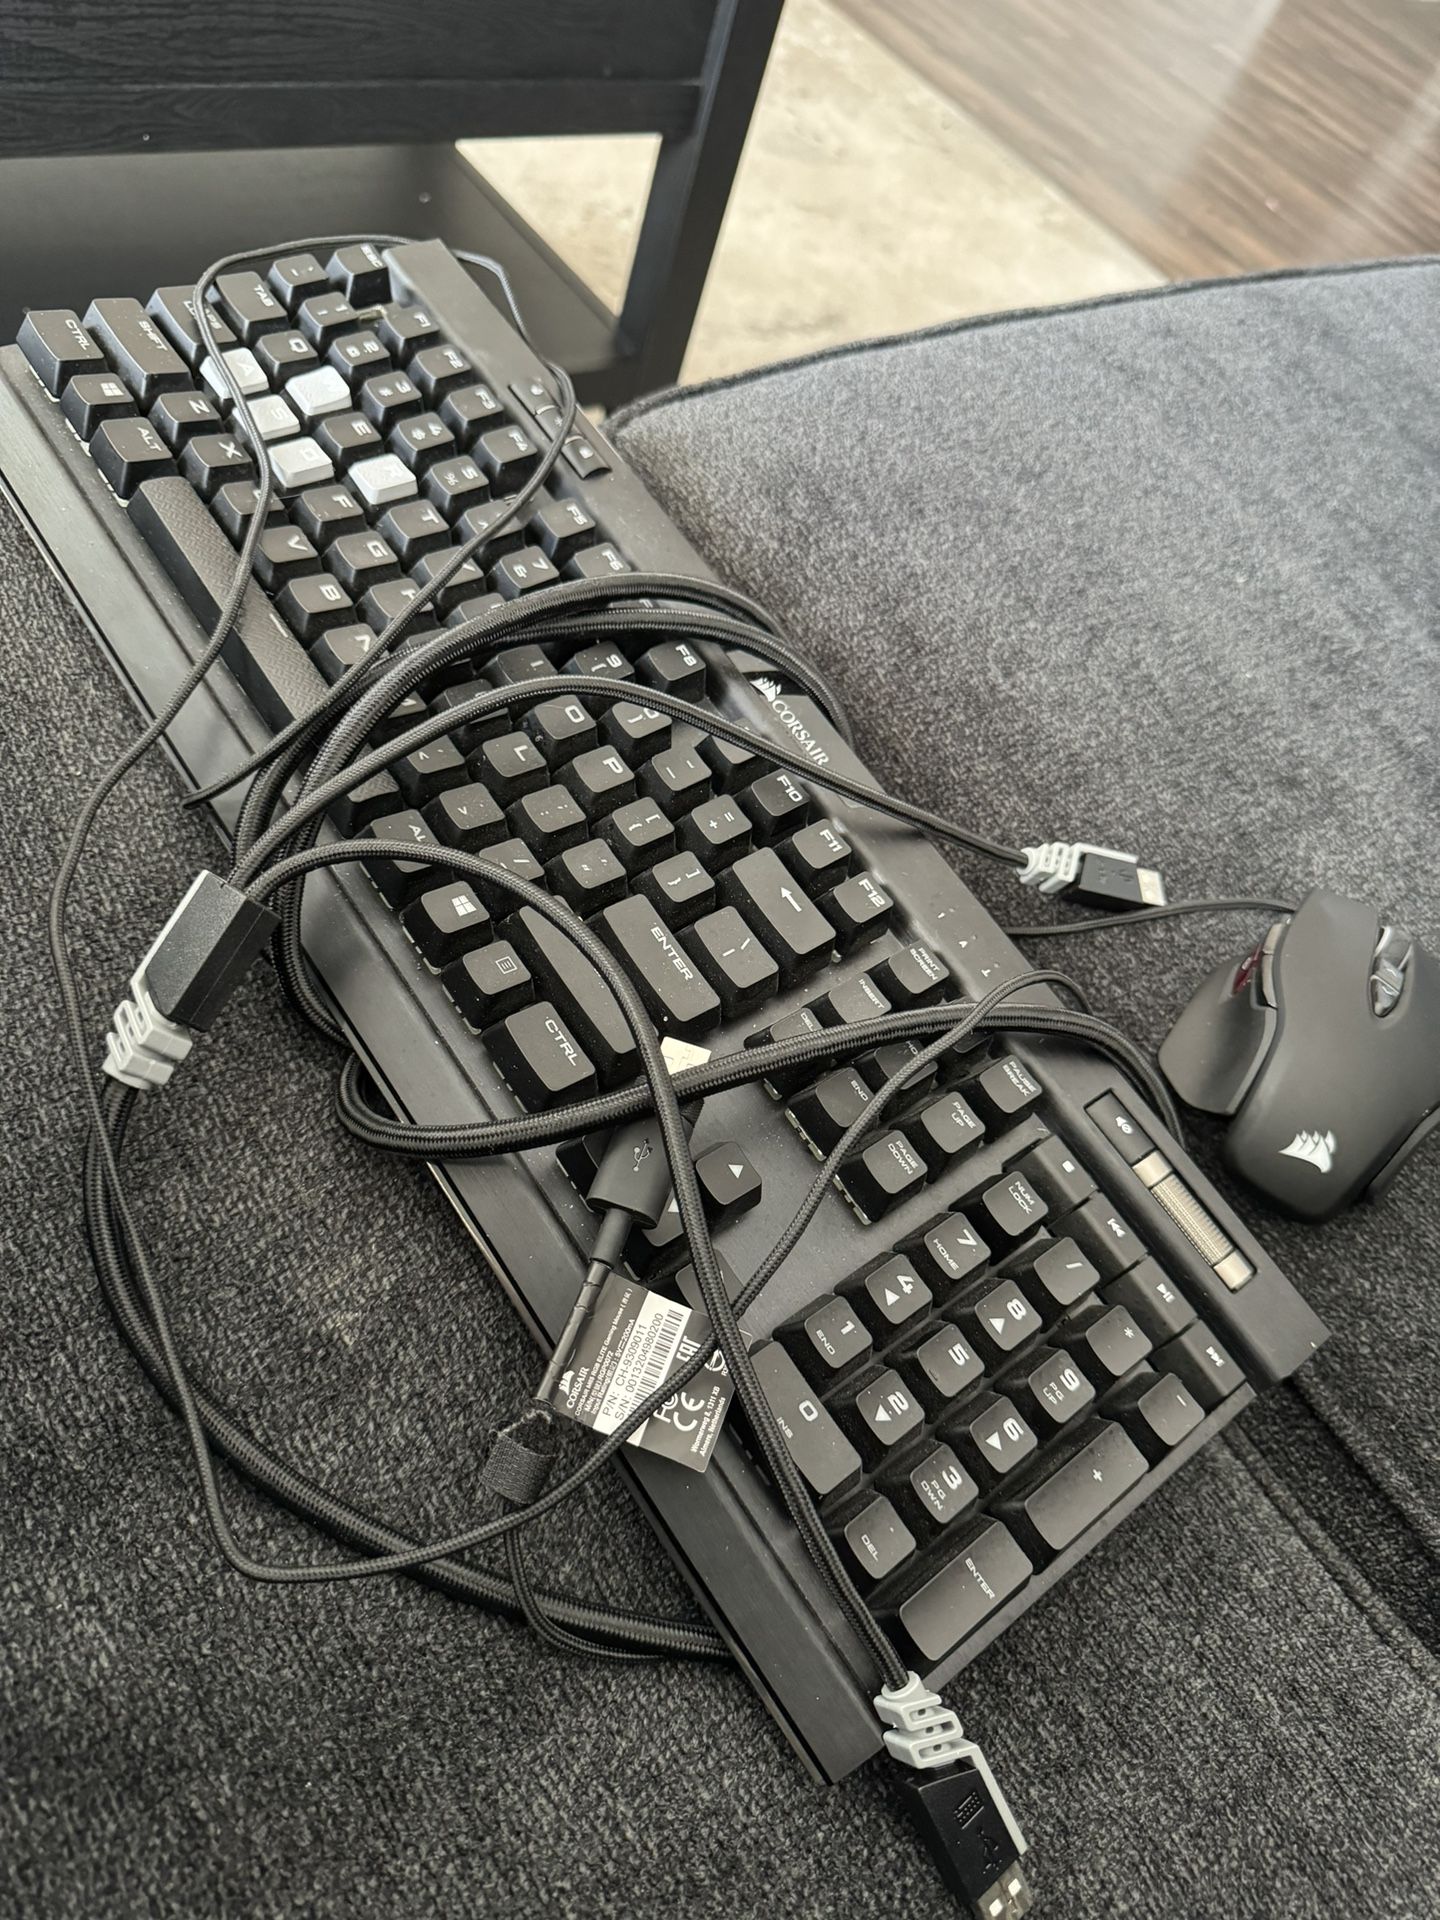 Corsair Keyboard And Mouse 